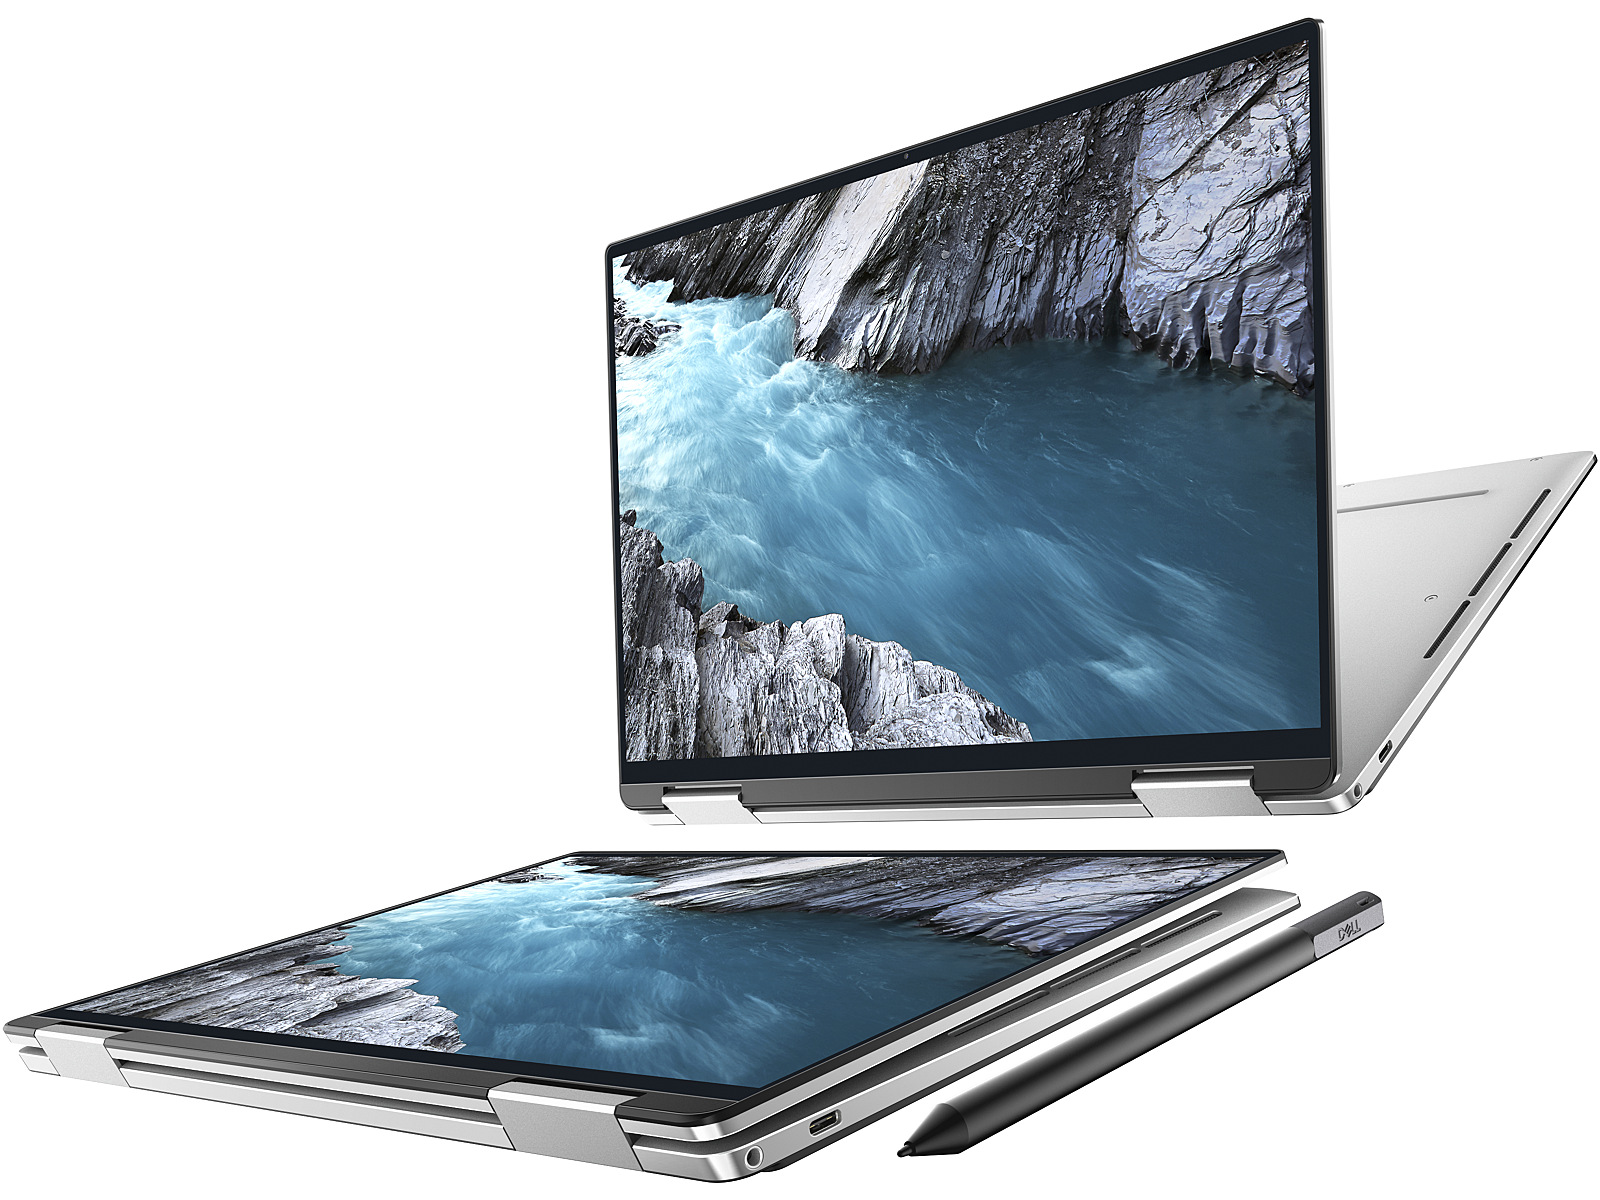 Dell Xps 13 9310 2in1 134 Fhd Ips Touch Intel I7 1165g7 16gb